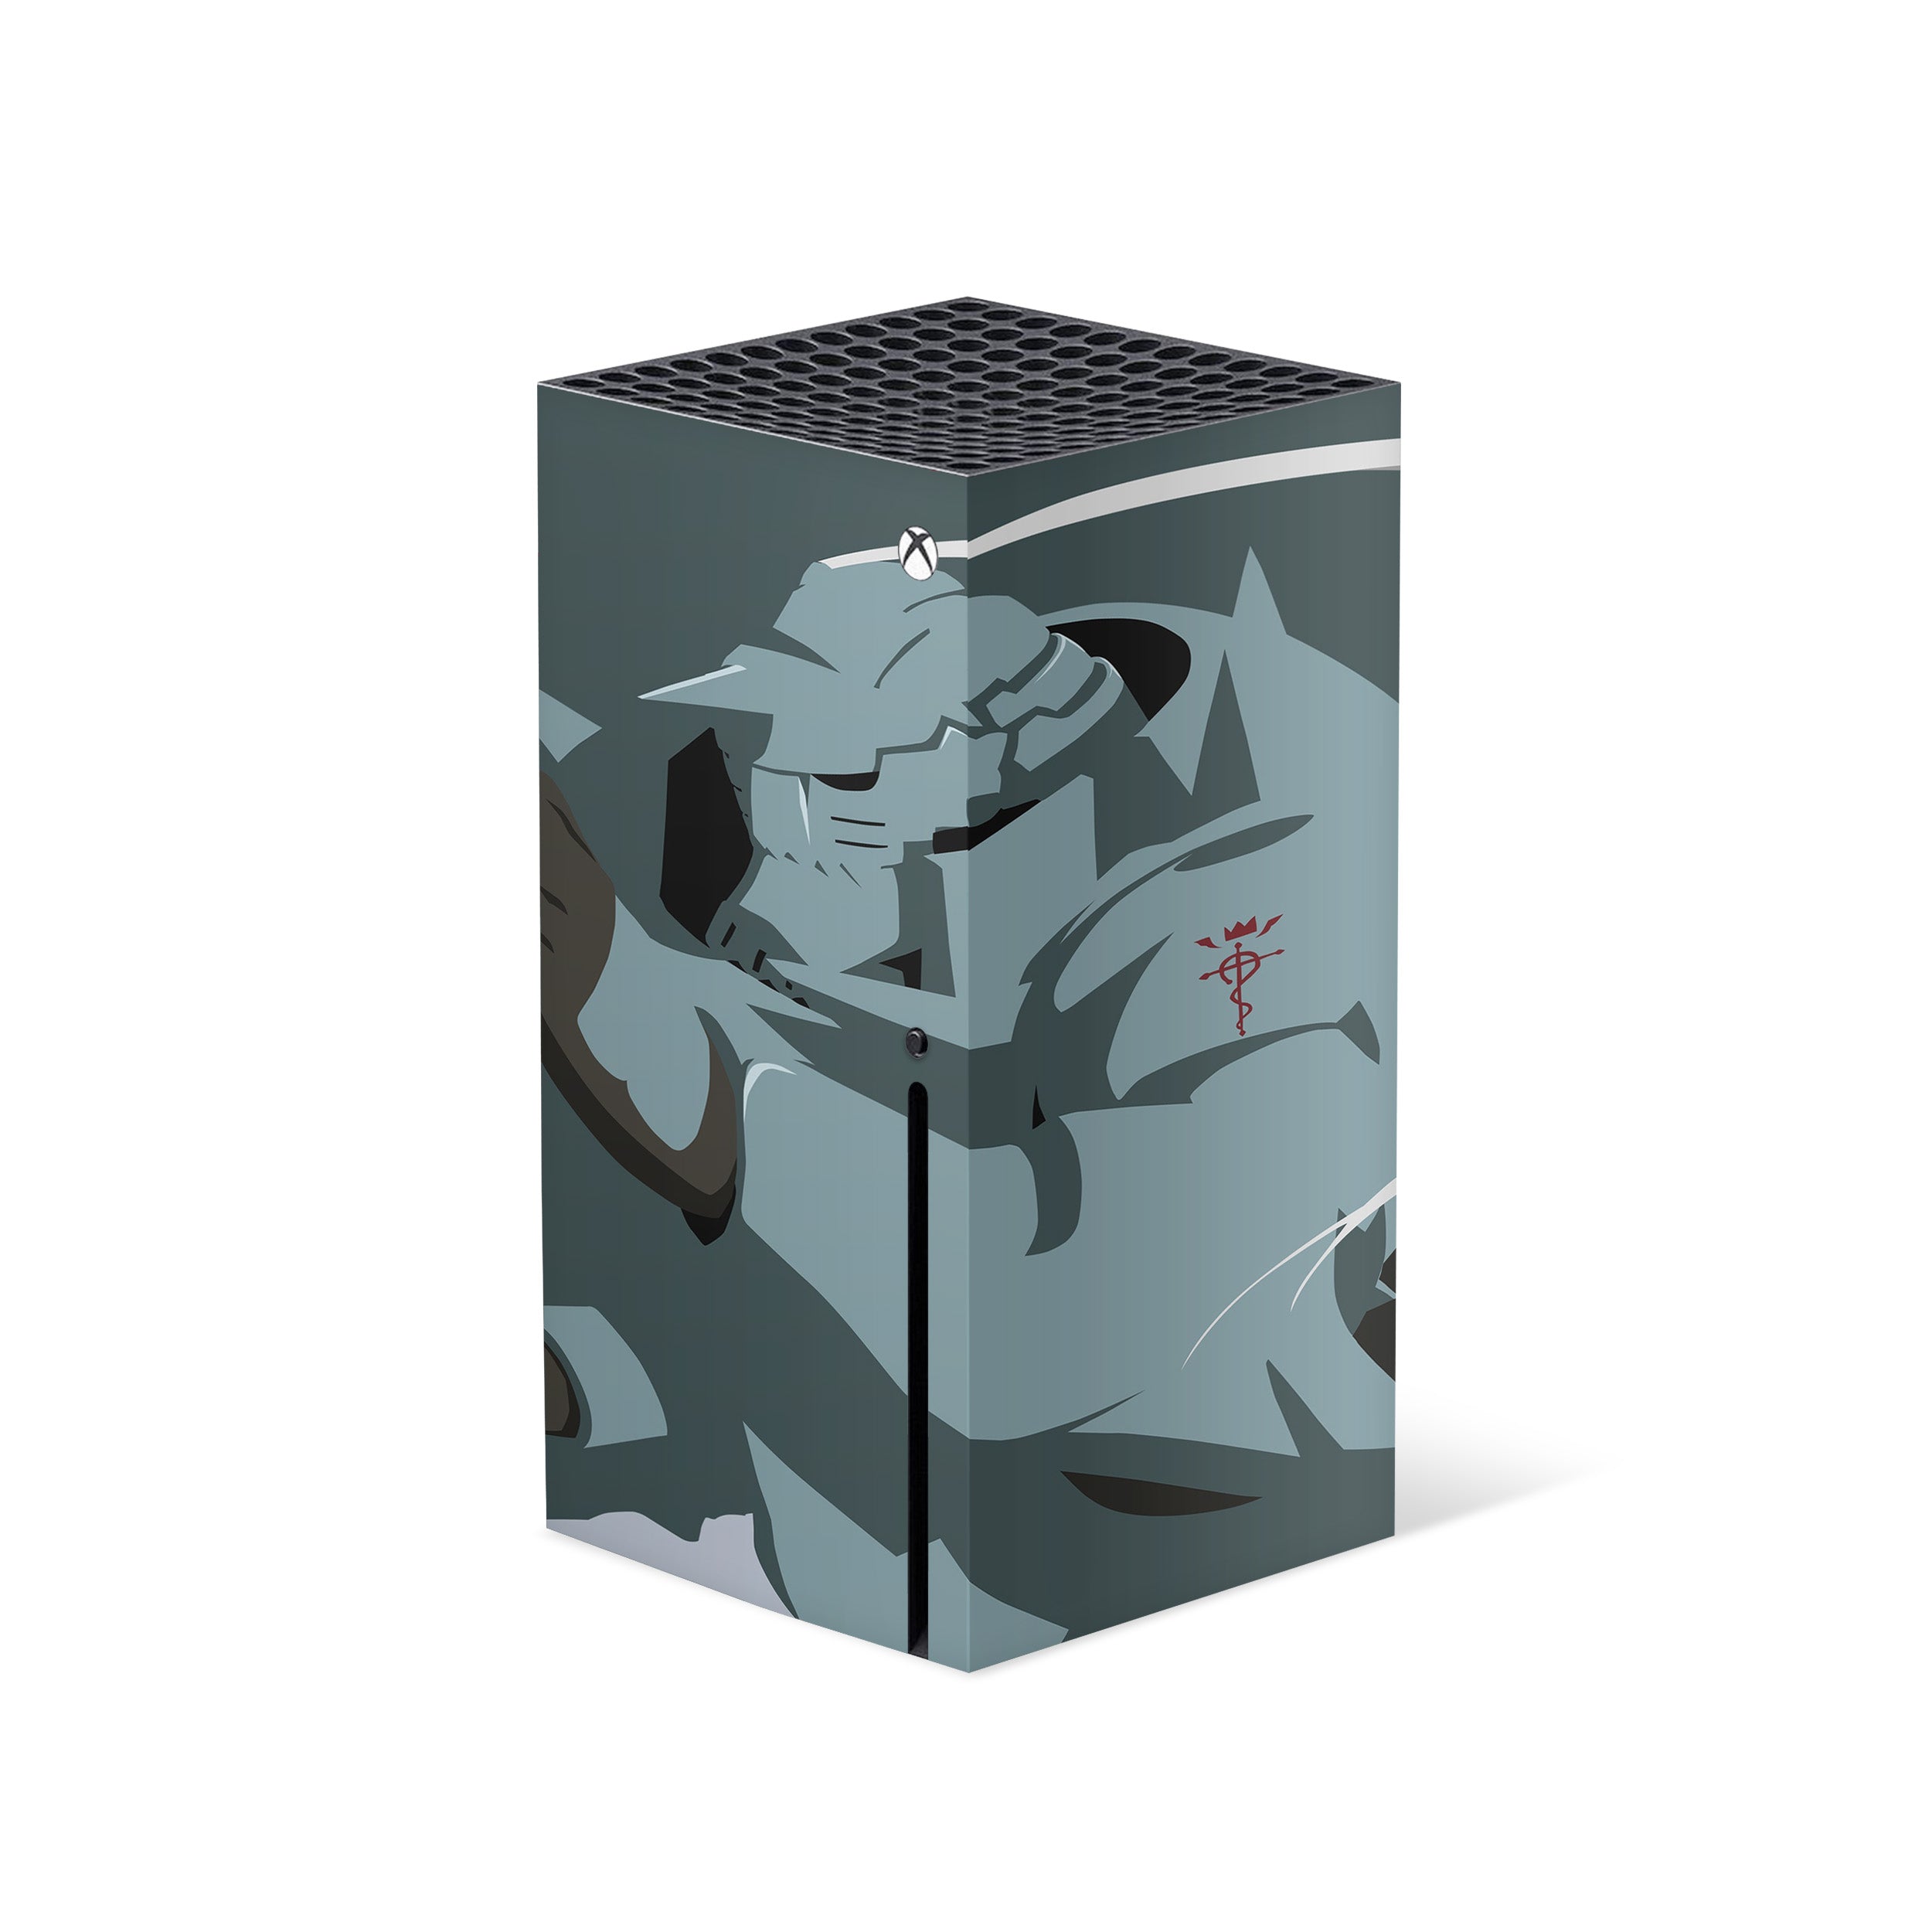 A video game skin featuring a Fullmetal Alchemist Alphonse Elric design for the Xbox Series X.